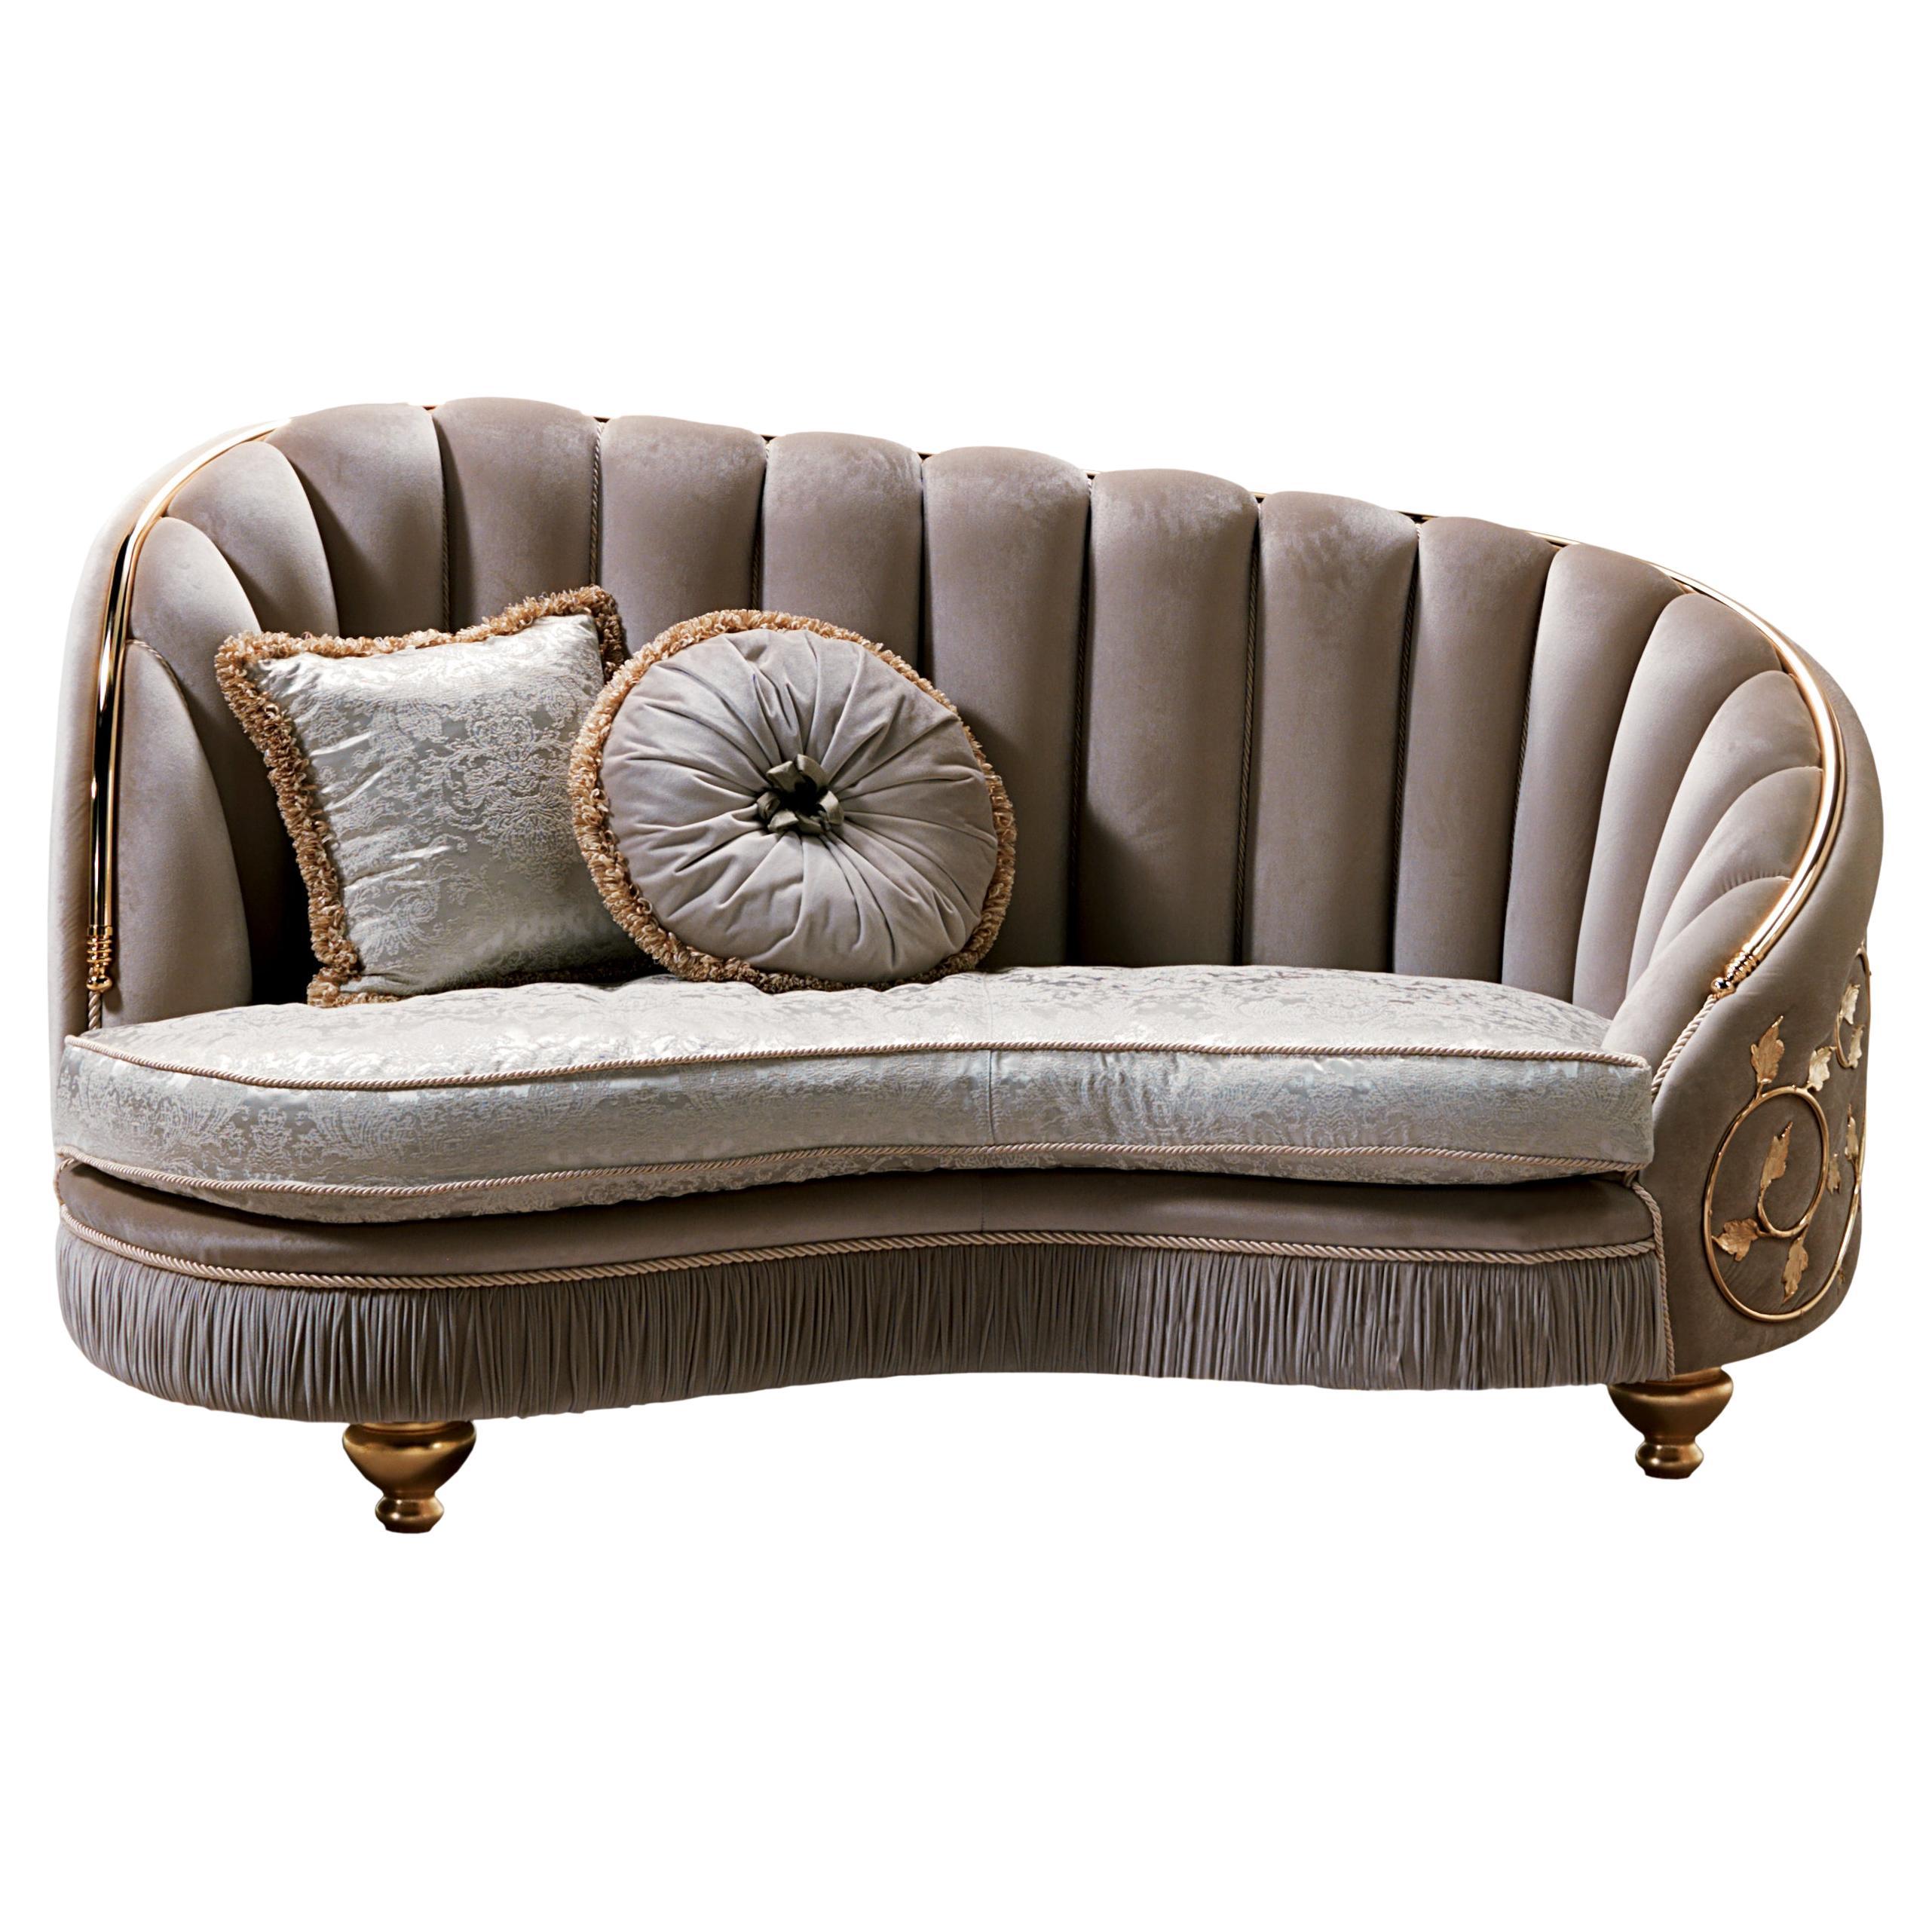 Neoclassical sofa with wrought iron decoration AQ032 For Sale